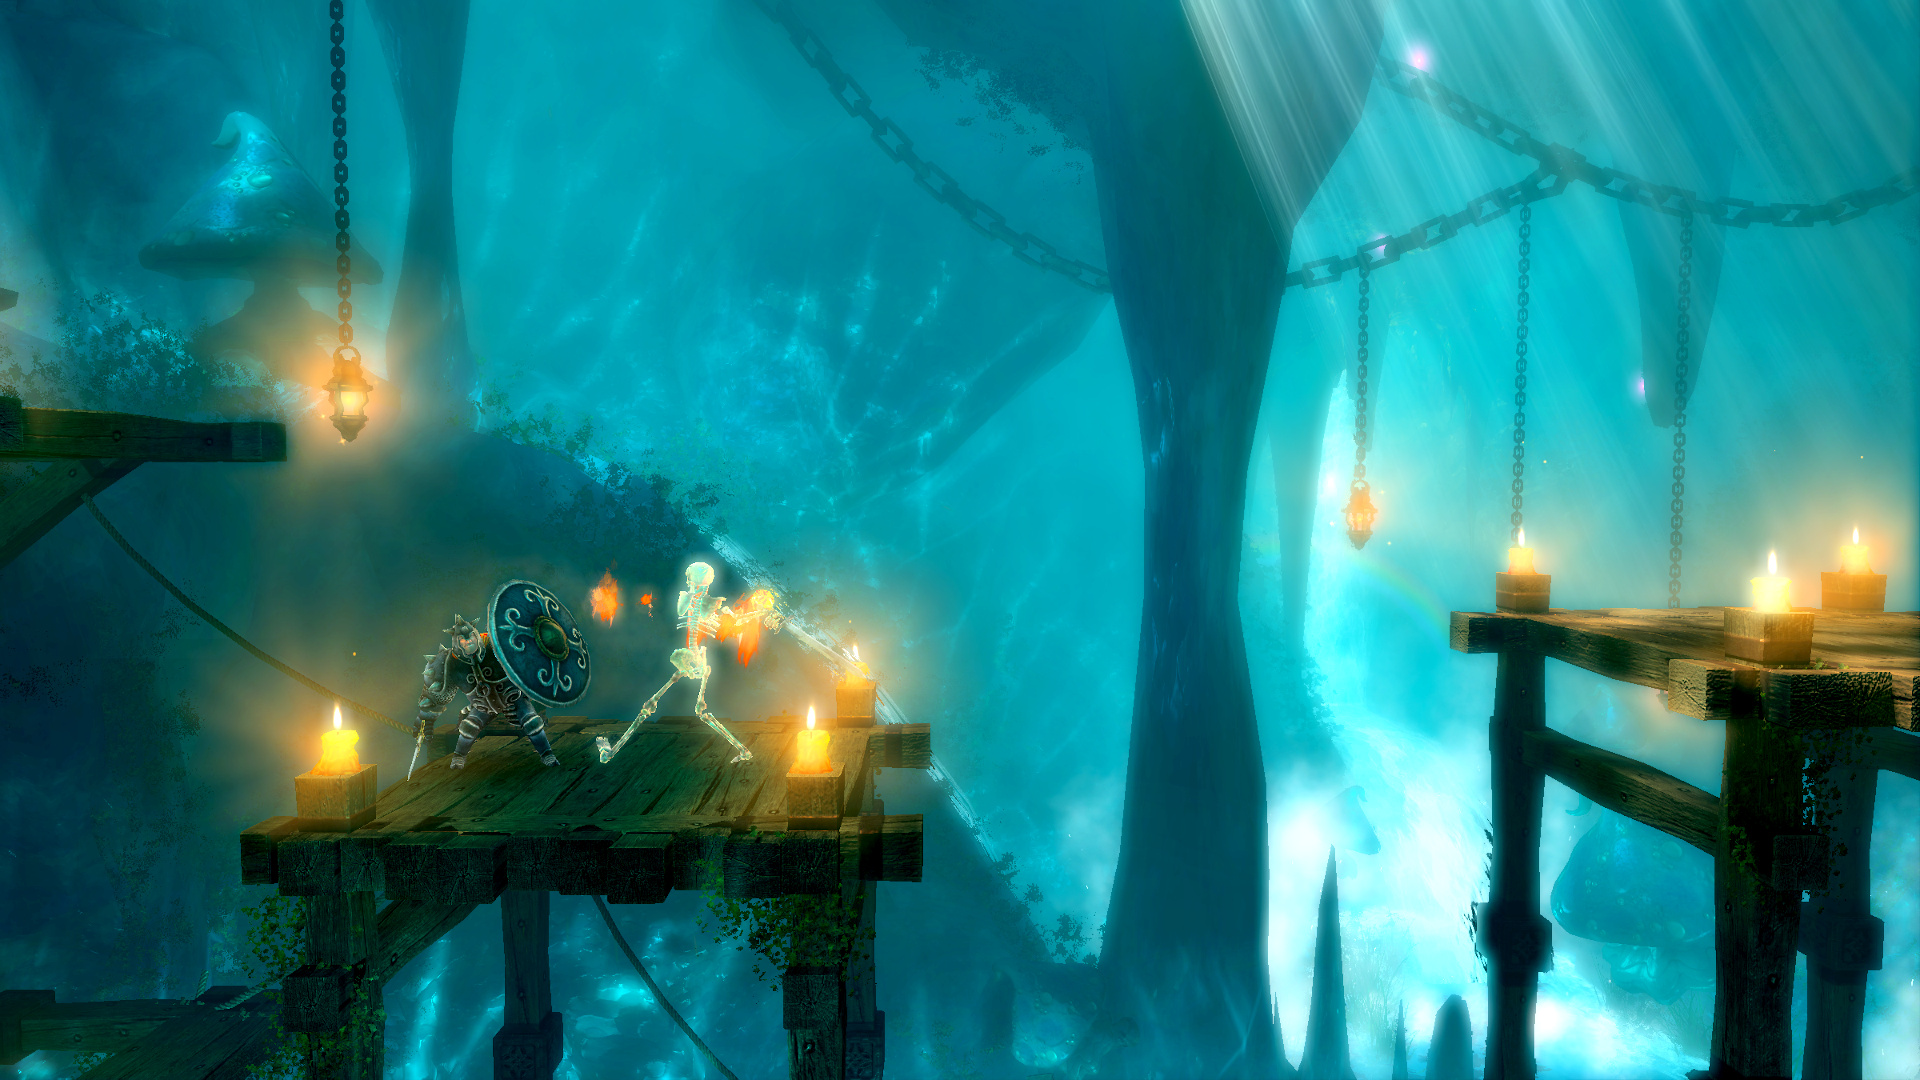 trine 2 for ps4